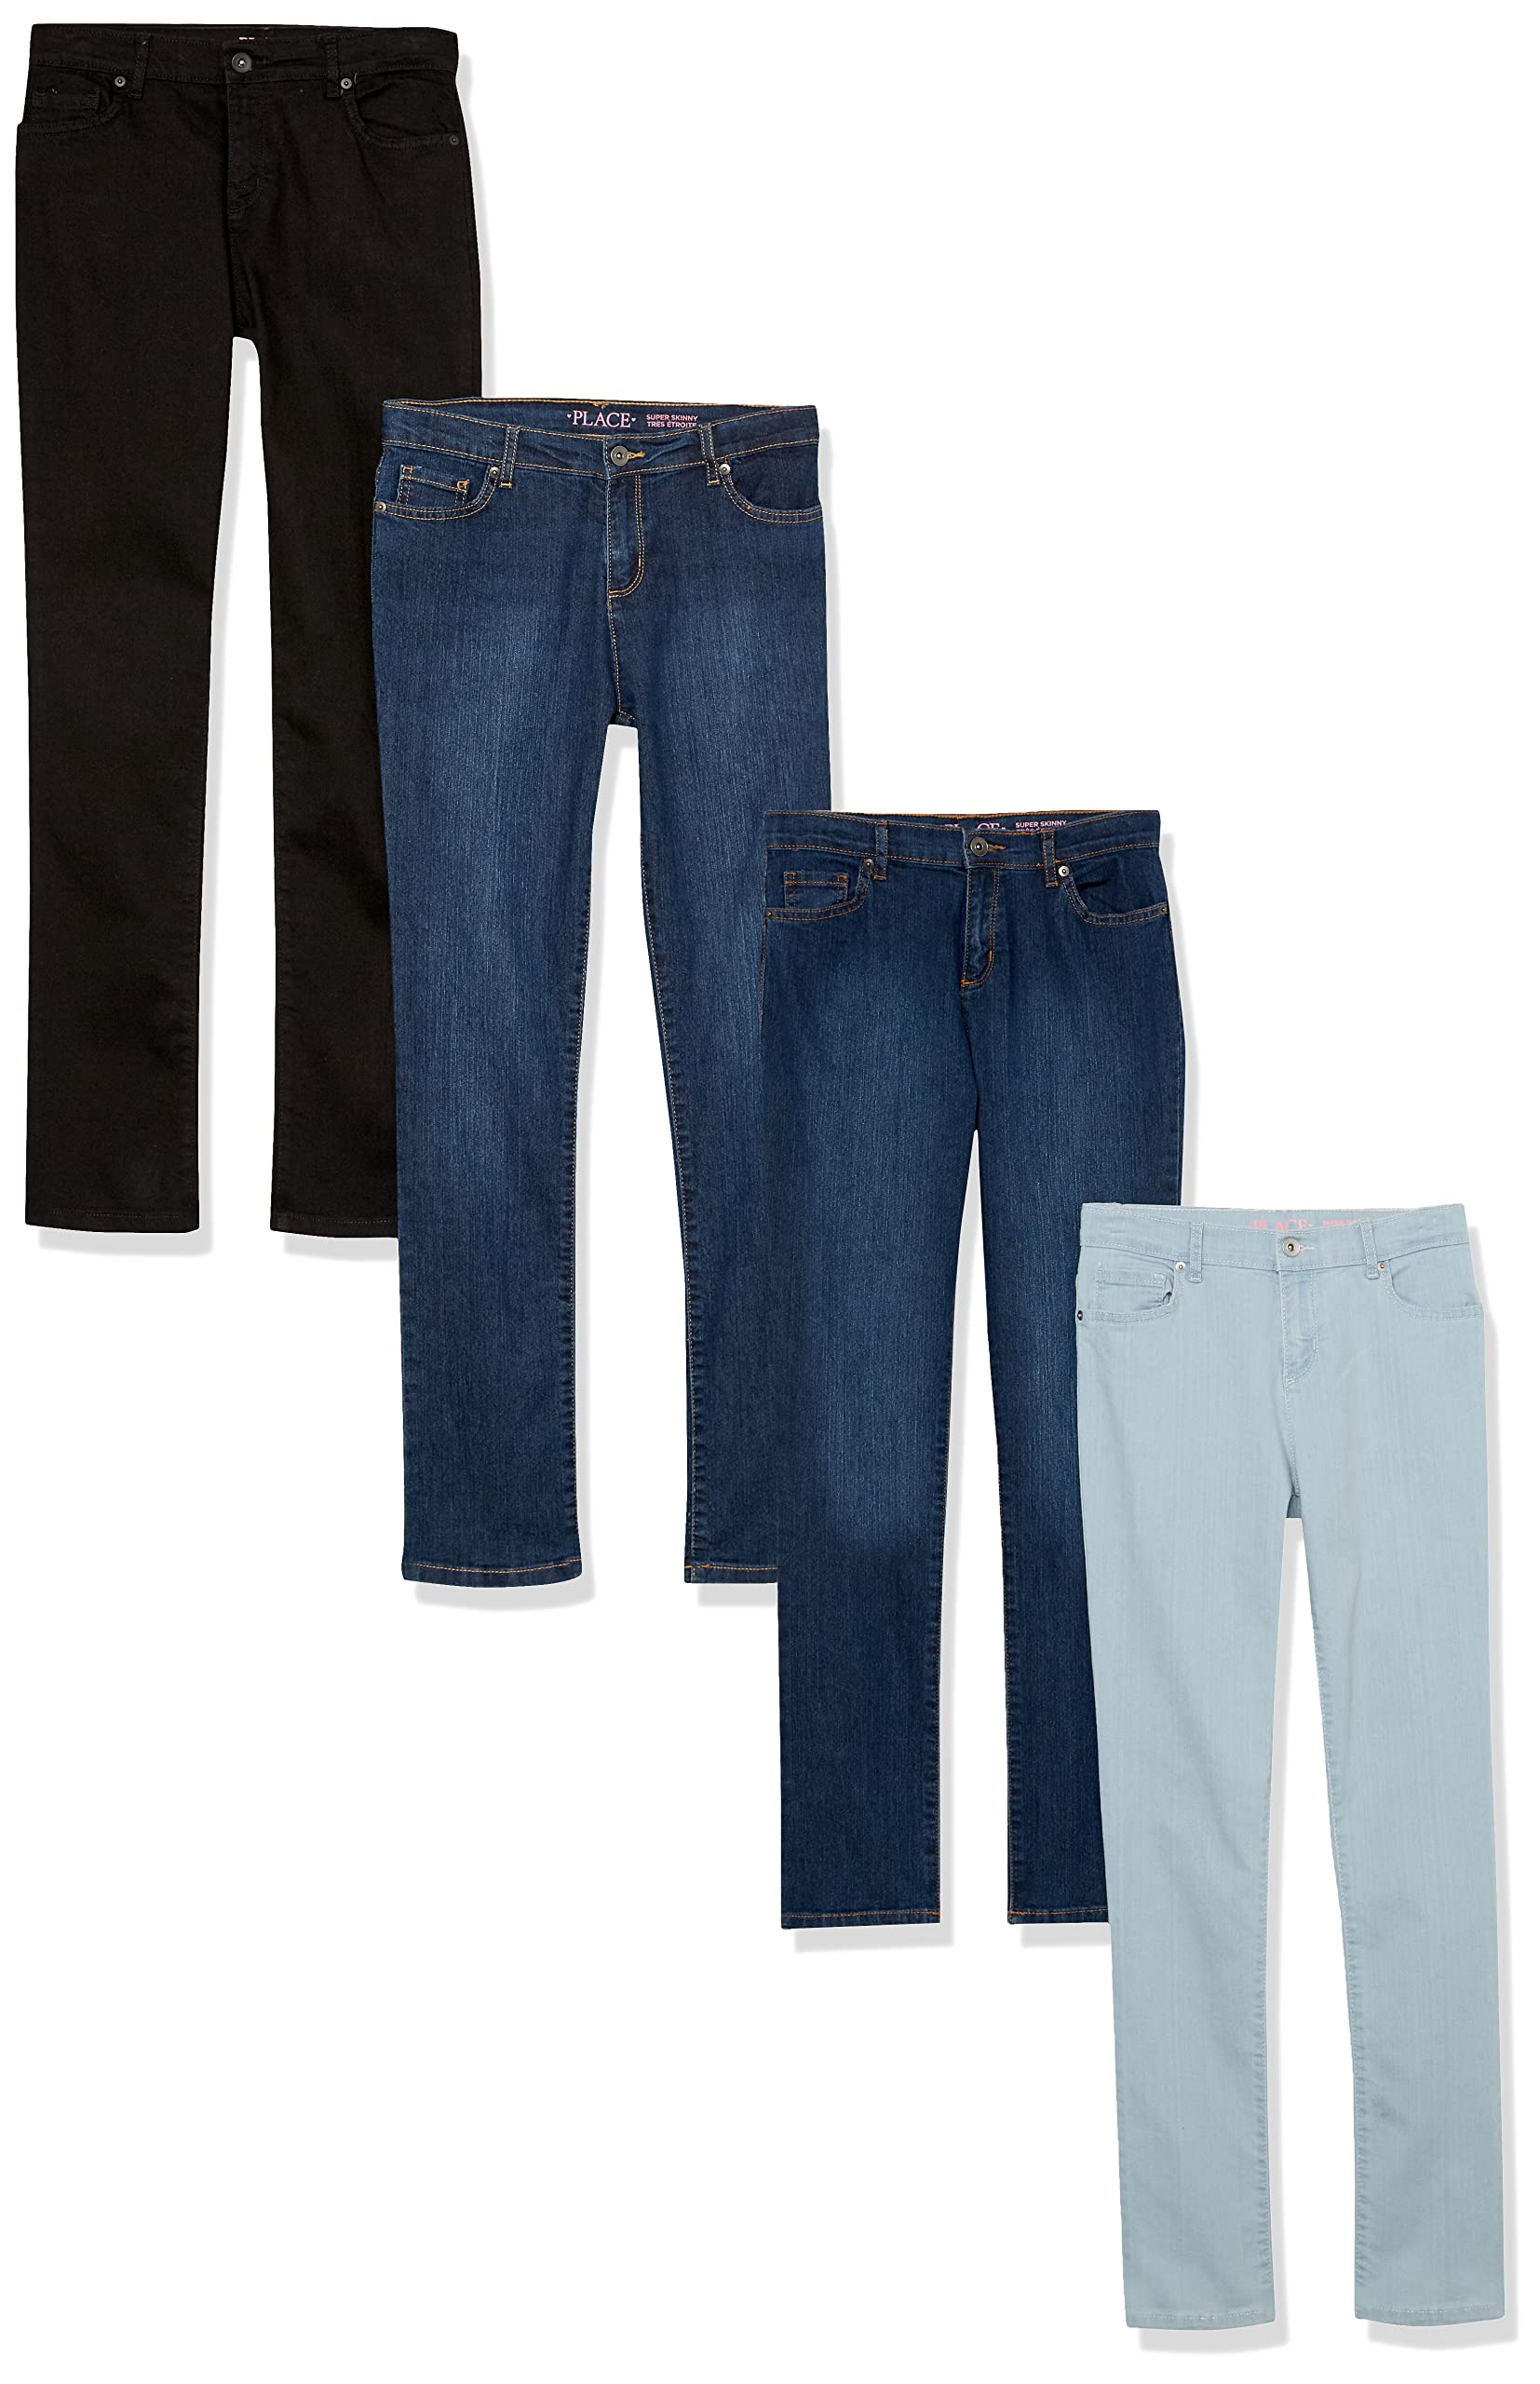 The Children's Place Girls Super Skinny Jeans